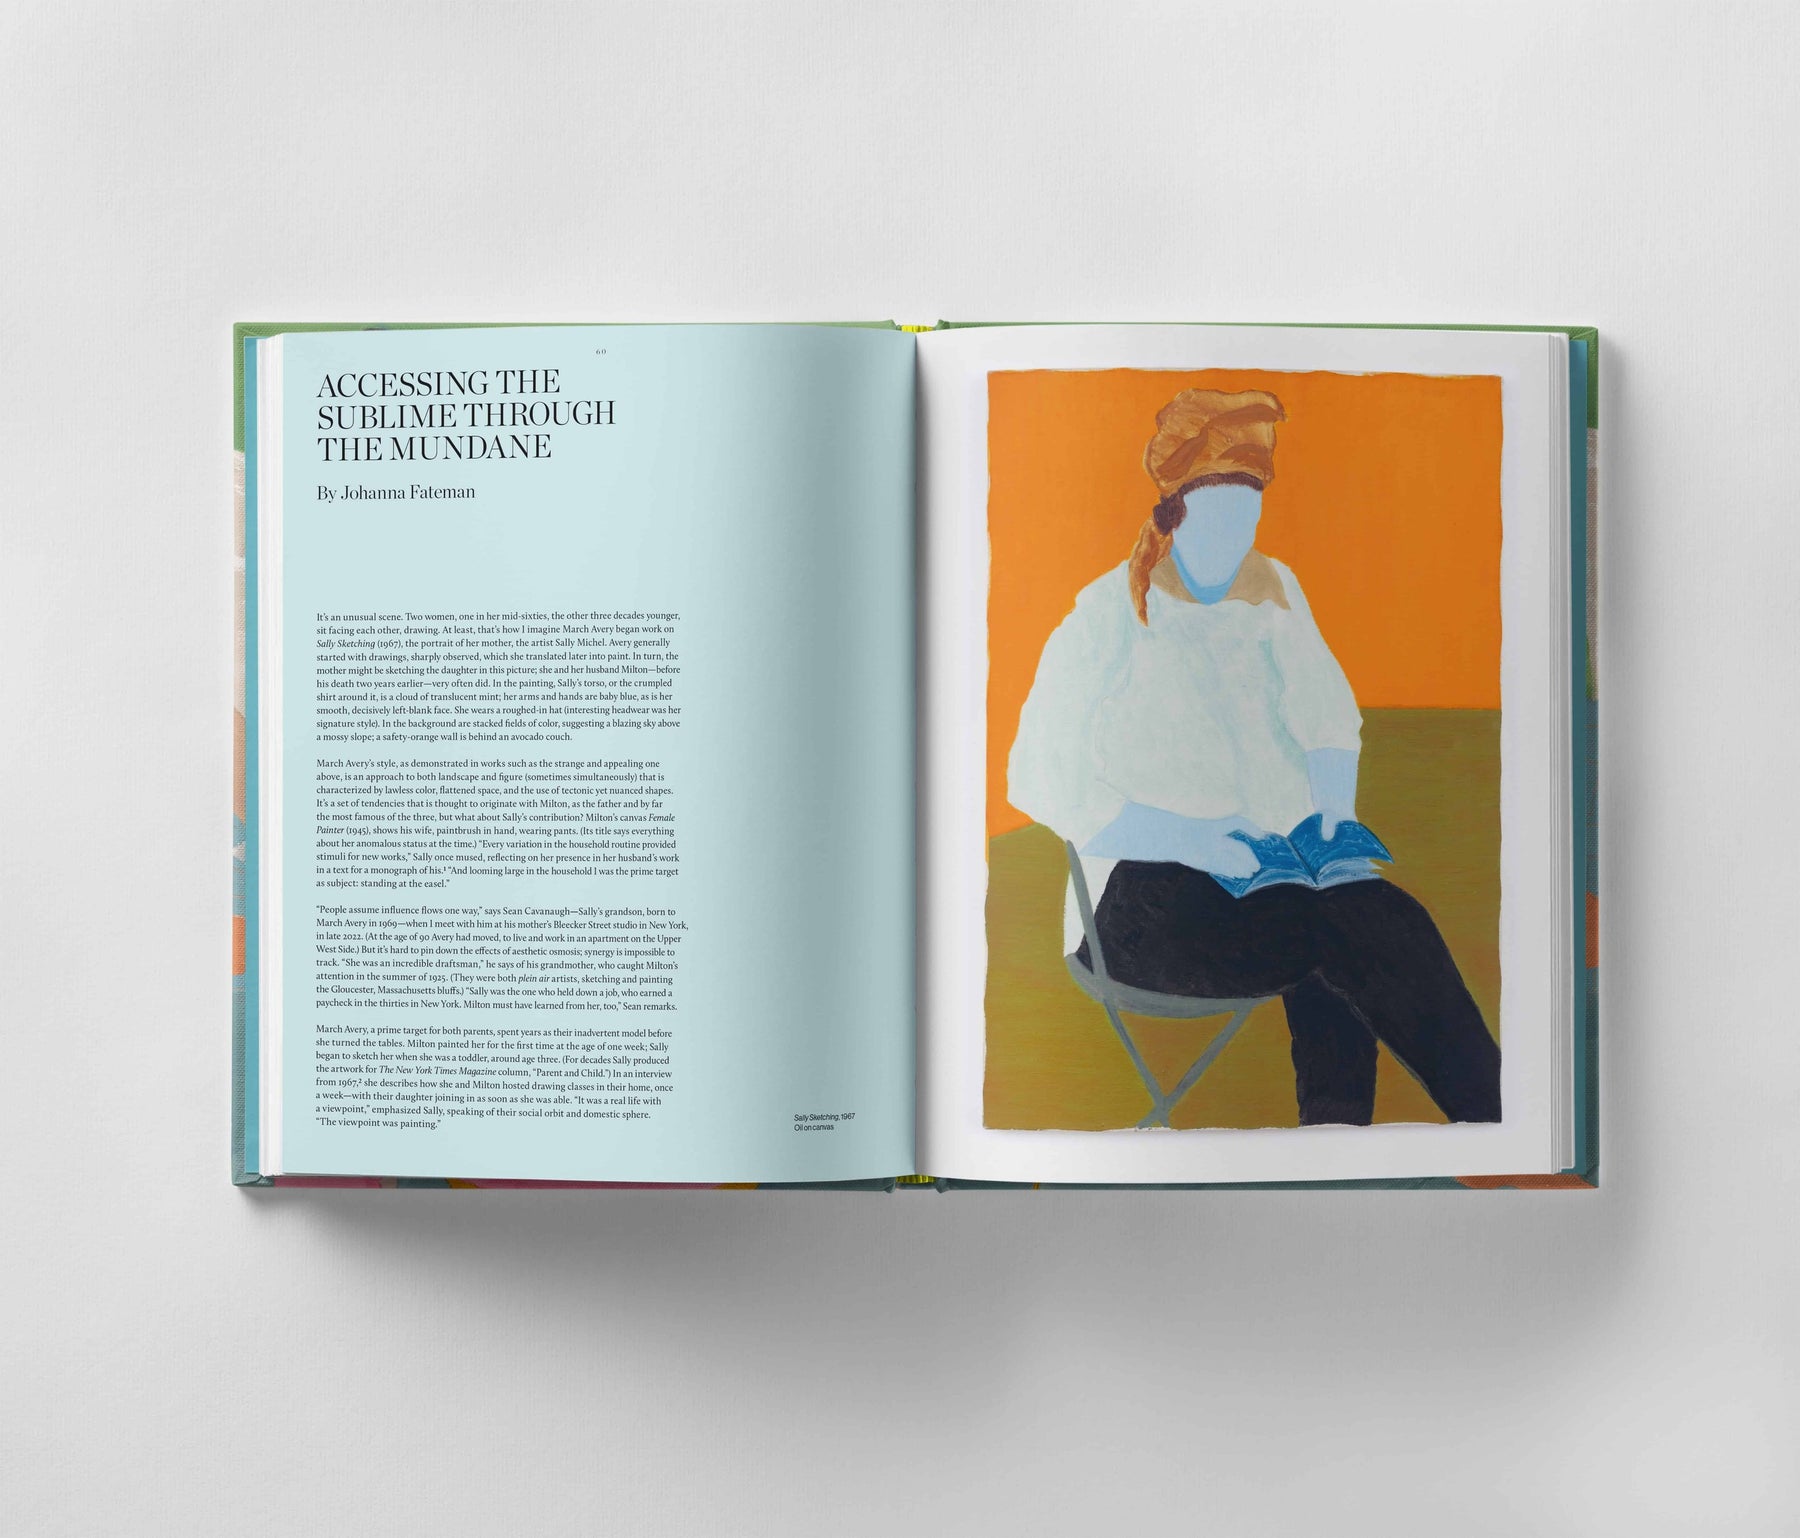 An open book lies before you, with an article titled "Accessing the Sublime Through the Mundane" on the left page. On the right page, there is **March Avery: A Life in Color** by **Black Dog Online**, depicting a seated person reading a book, capturing profound emotional depth.